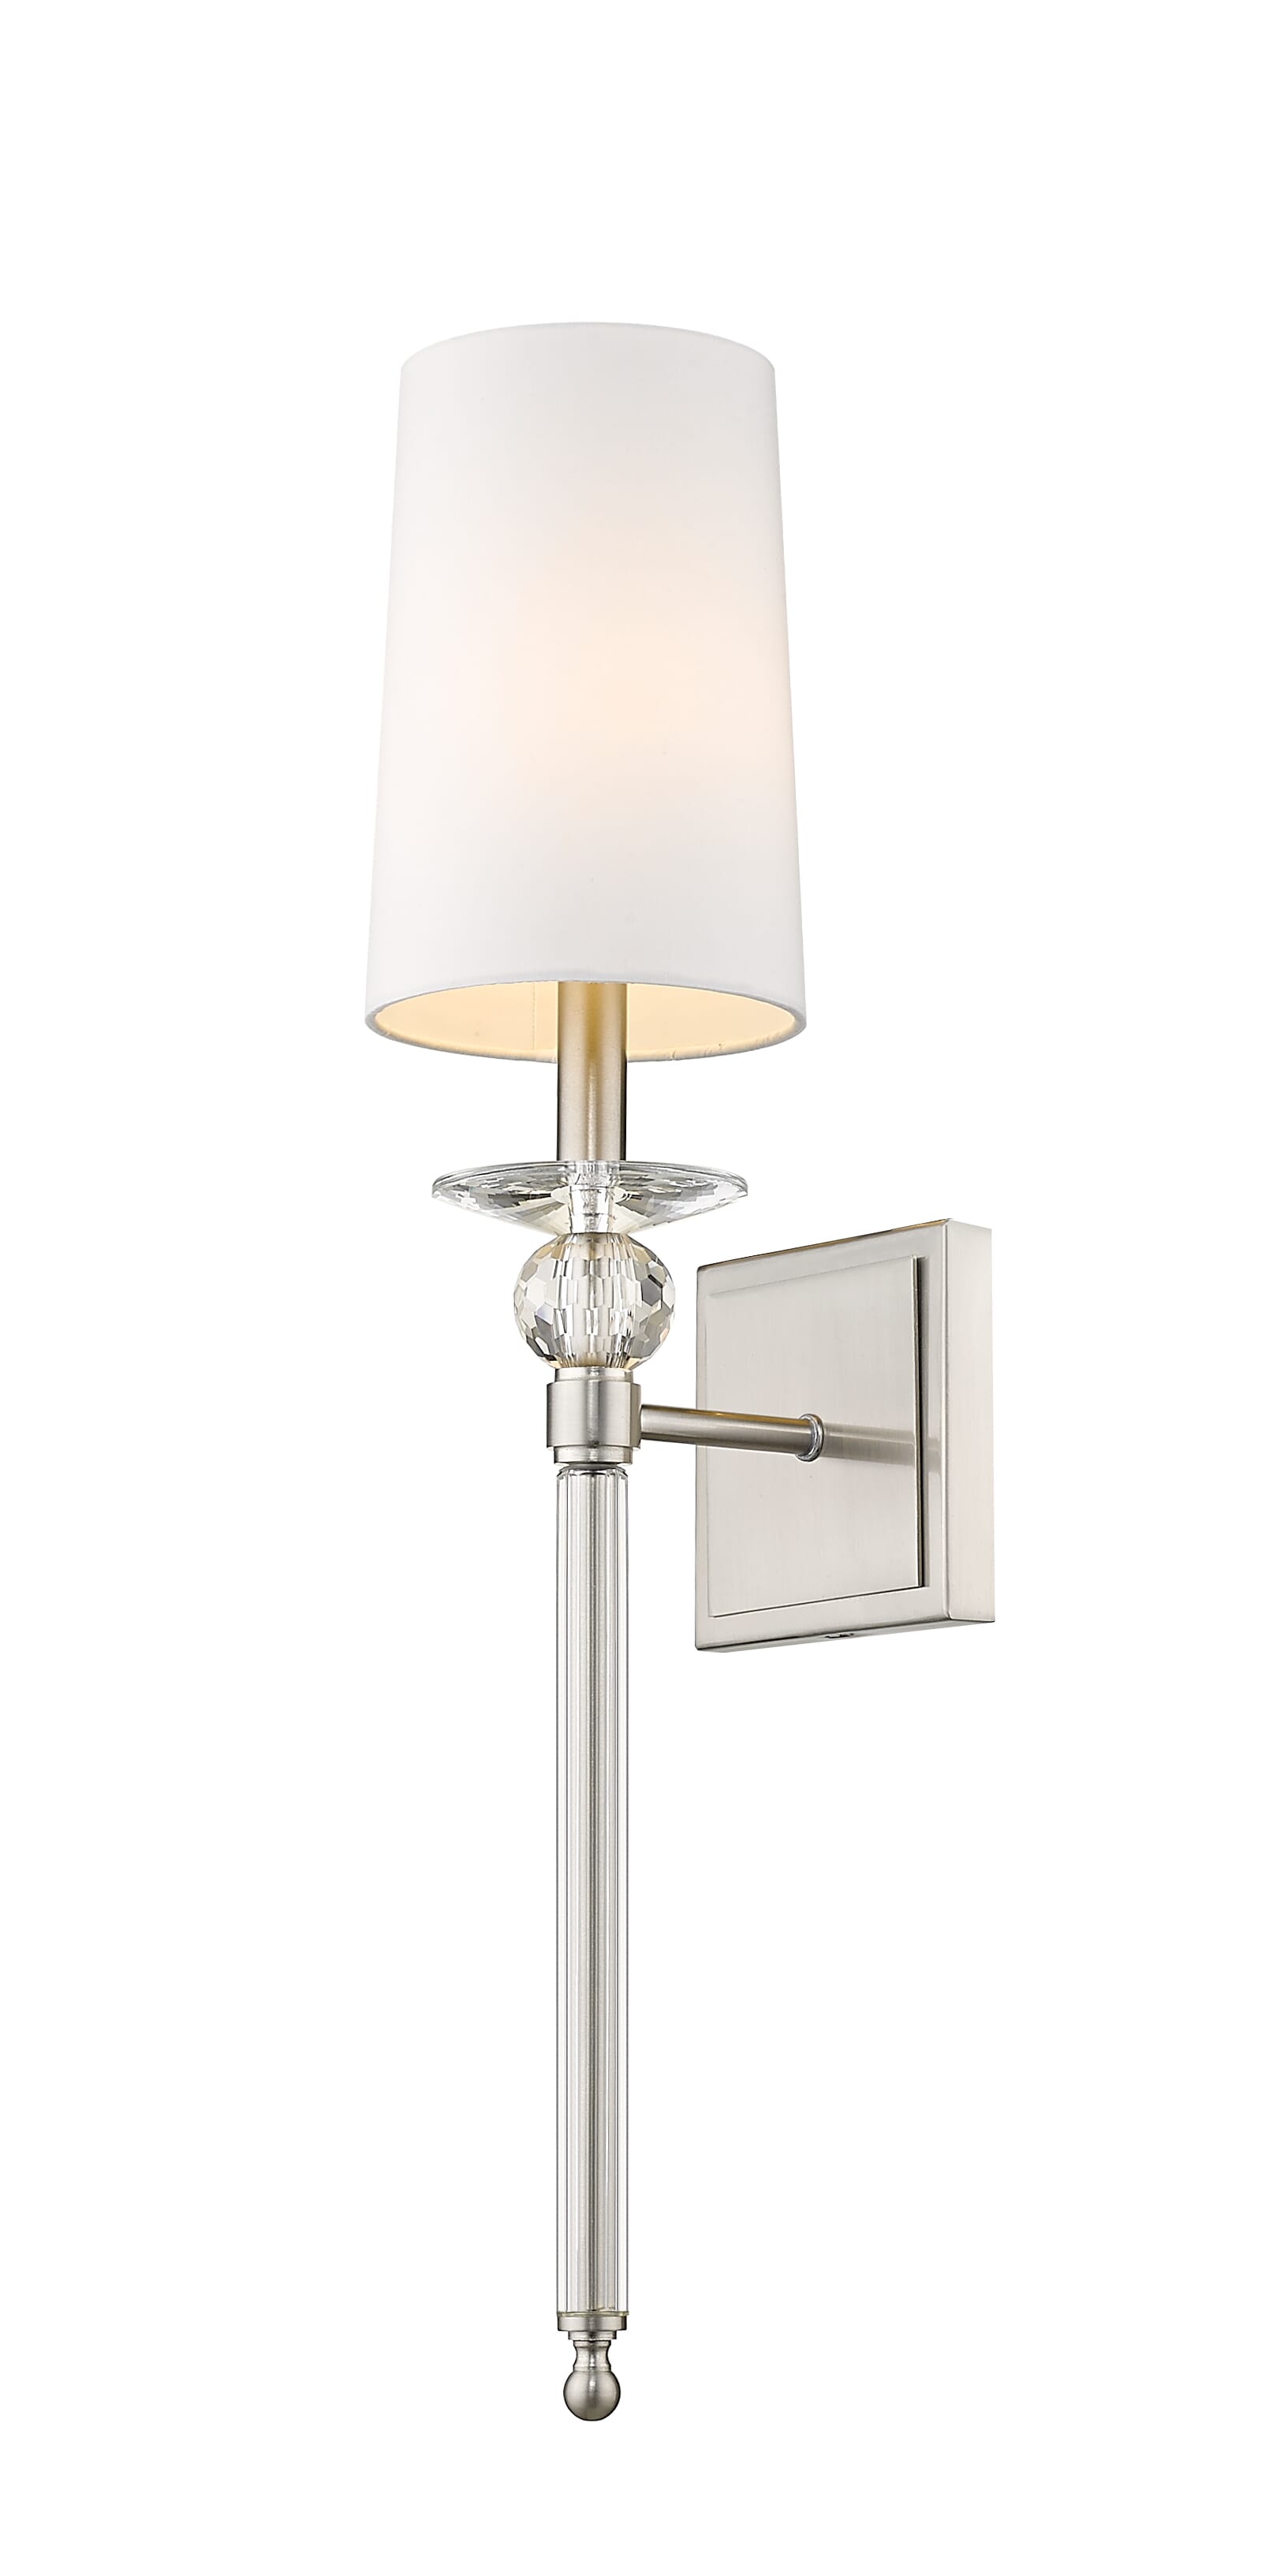 Ava 1-Light Wall Sconce In Brushed Nickel